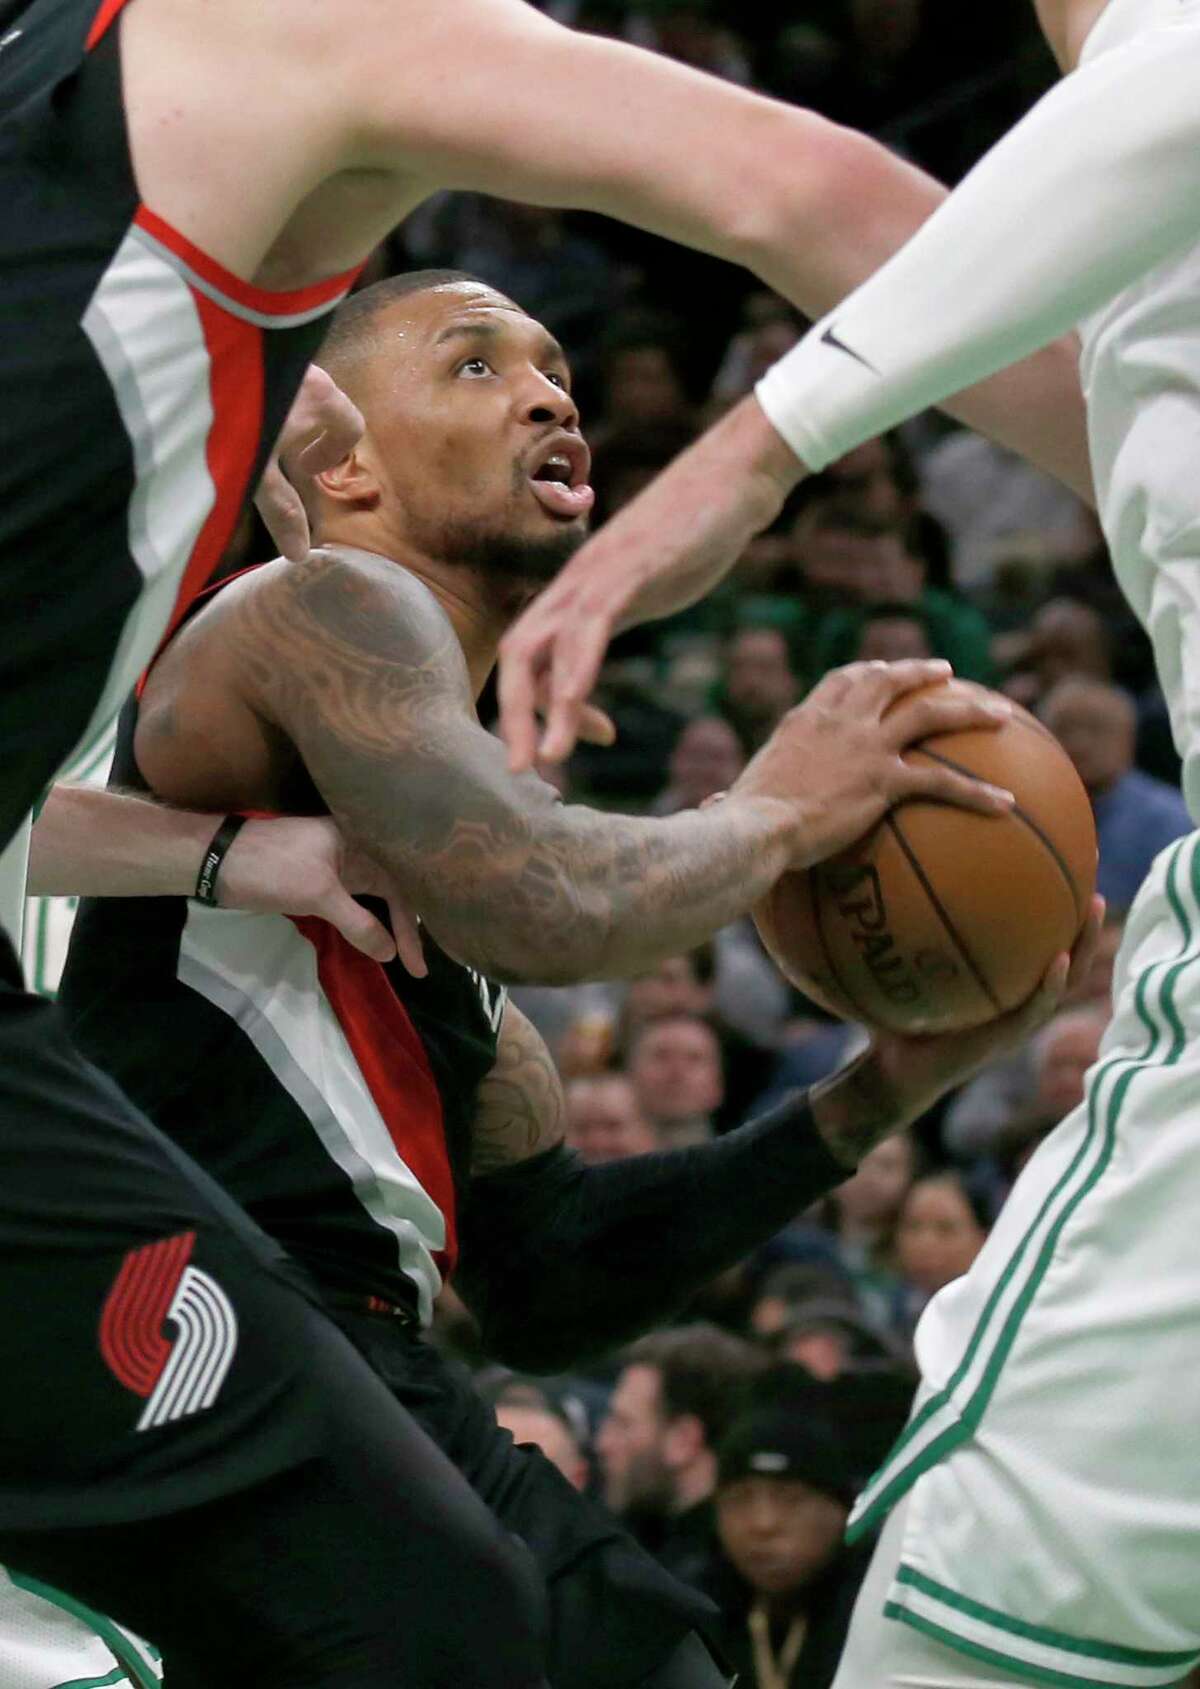 Portland Trail Blazers guard Damian Lillard drives to the basket through teammates and Boston Celtics defenders during the second half of an NBA basketball game Wednesday, Feb. 27, 2019, in Boston. (AP Photo/Mary Schwalm)